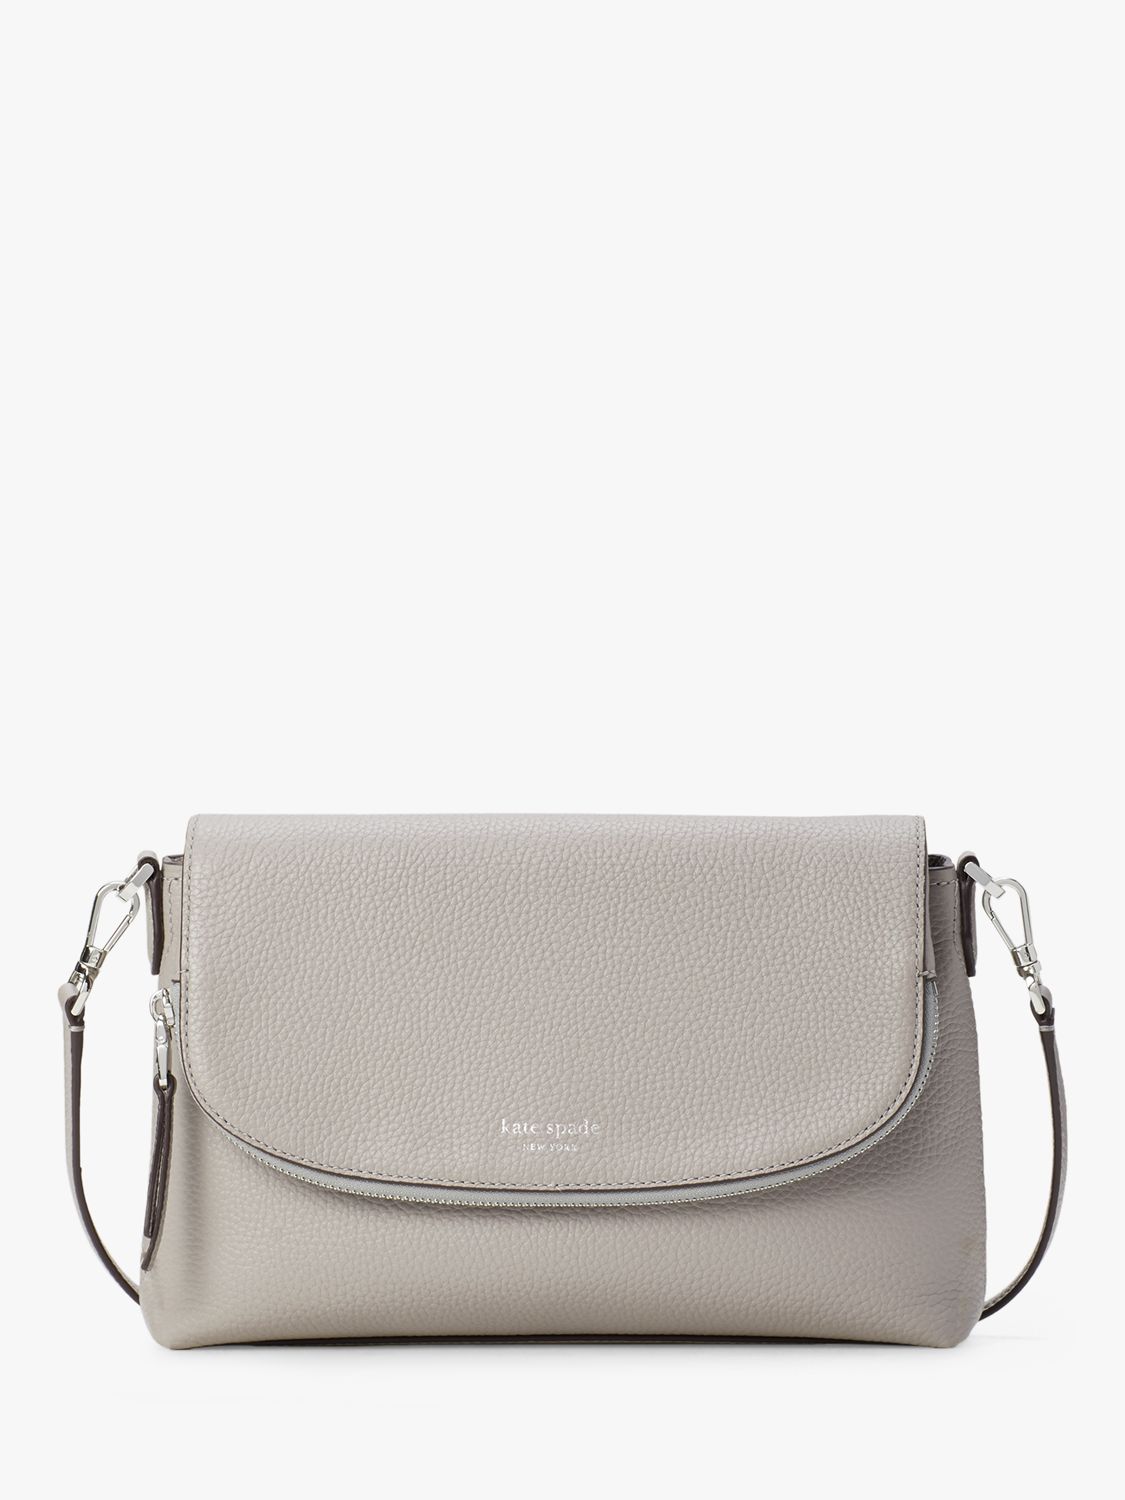 kate spade new york Polly Leather Large Flap Over Cross Body Bag, True Taupe at John Lewis ...